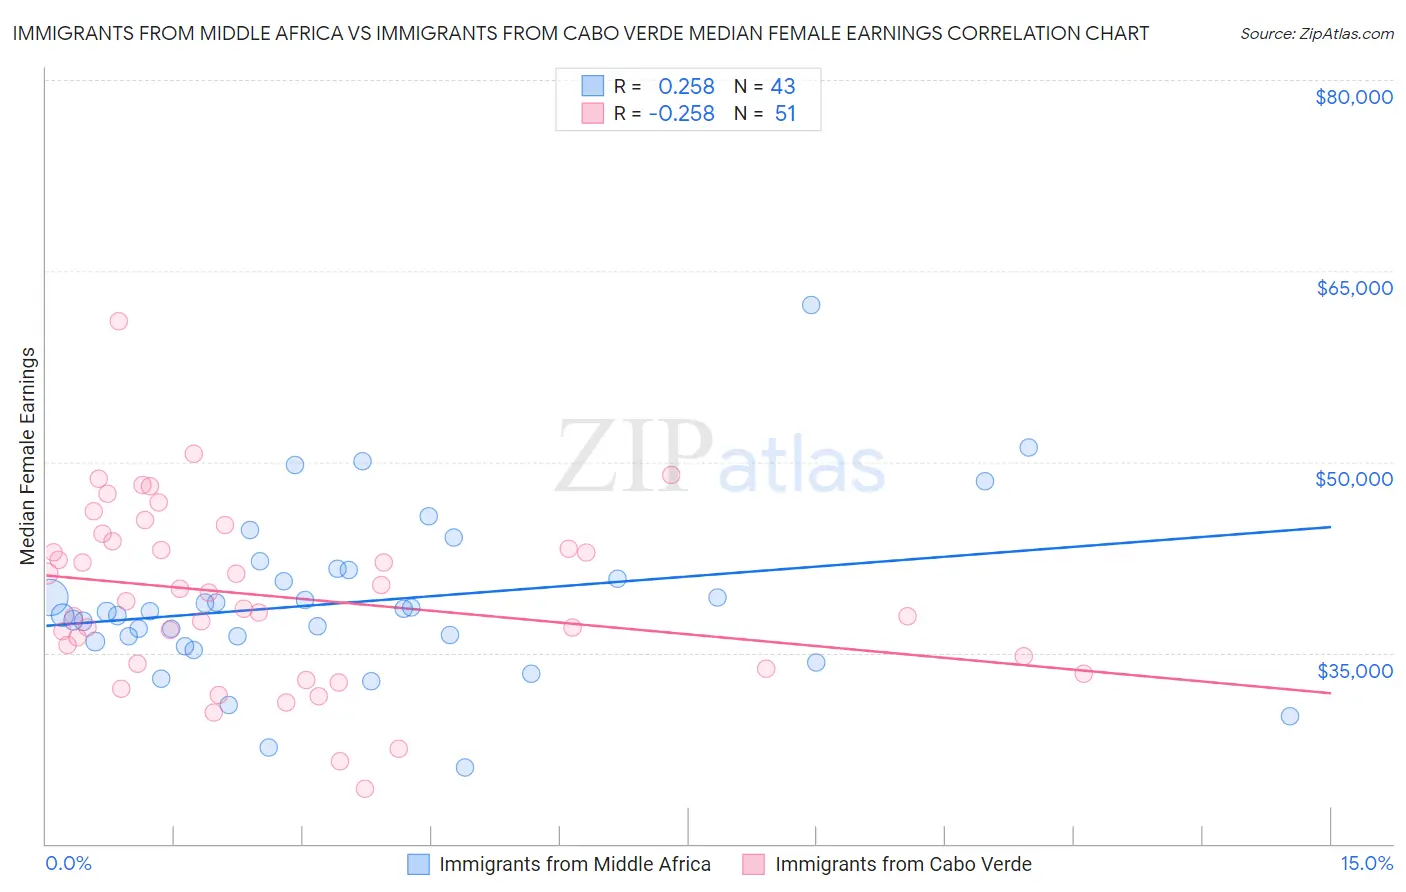 Immigrants from Middle Africa vs Immigrants from Cabo Verde Median Female Earnings